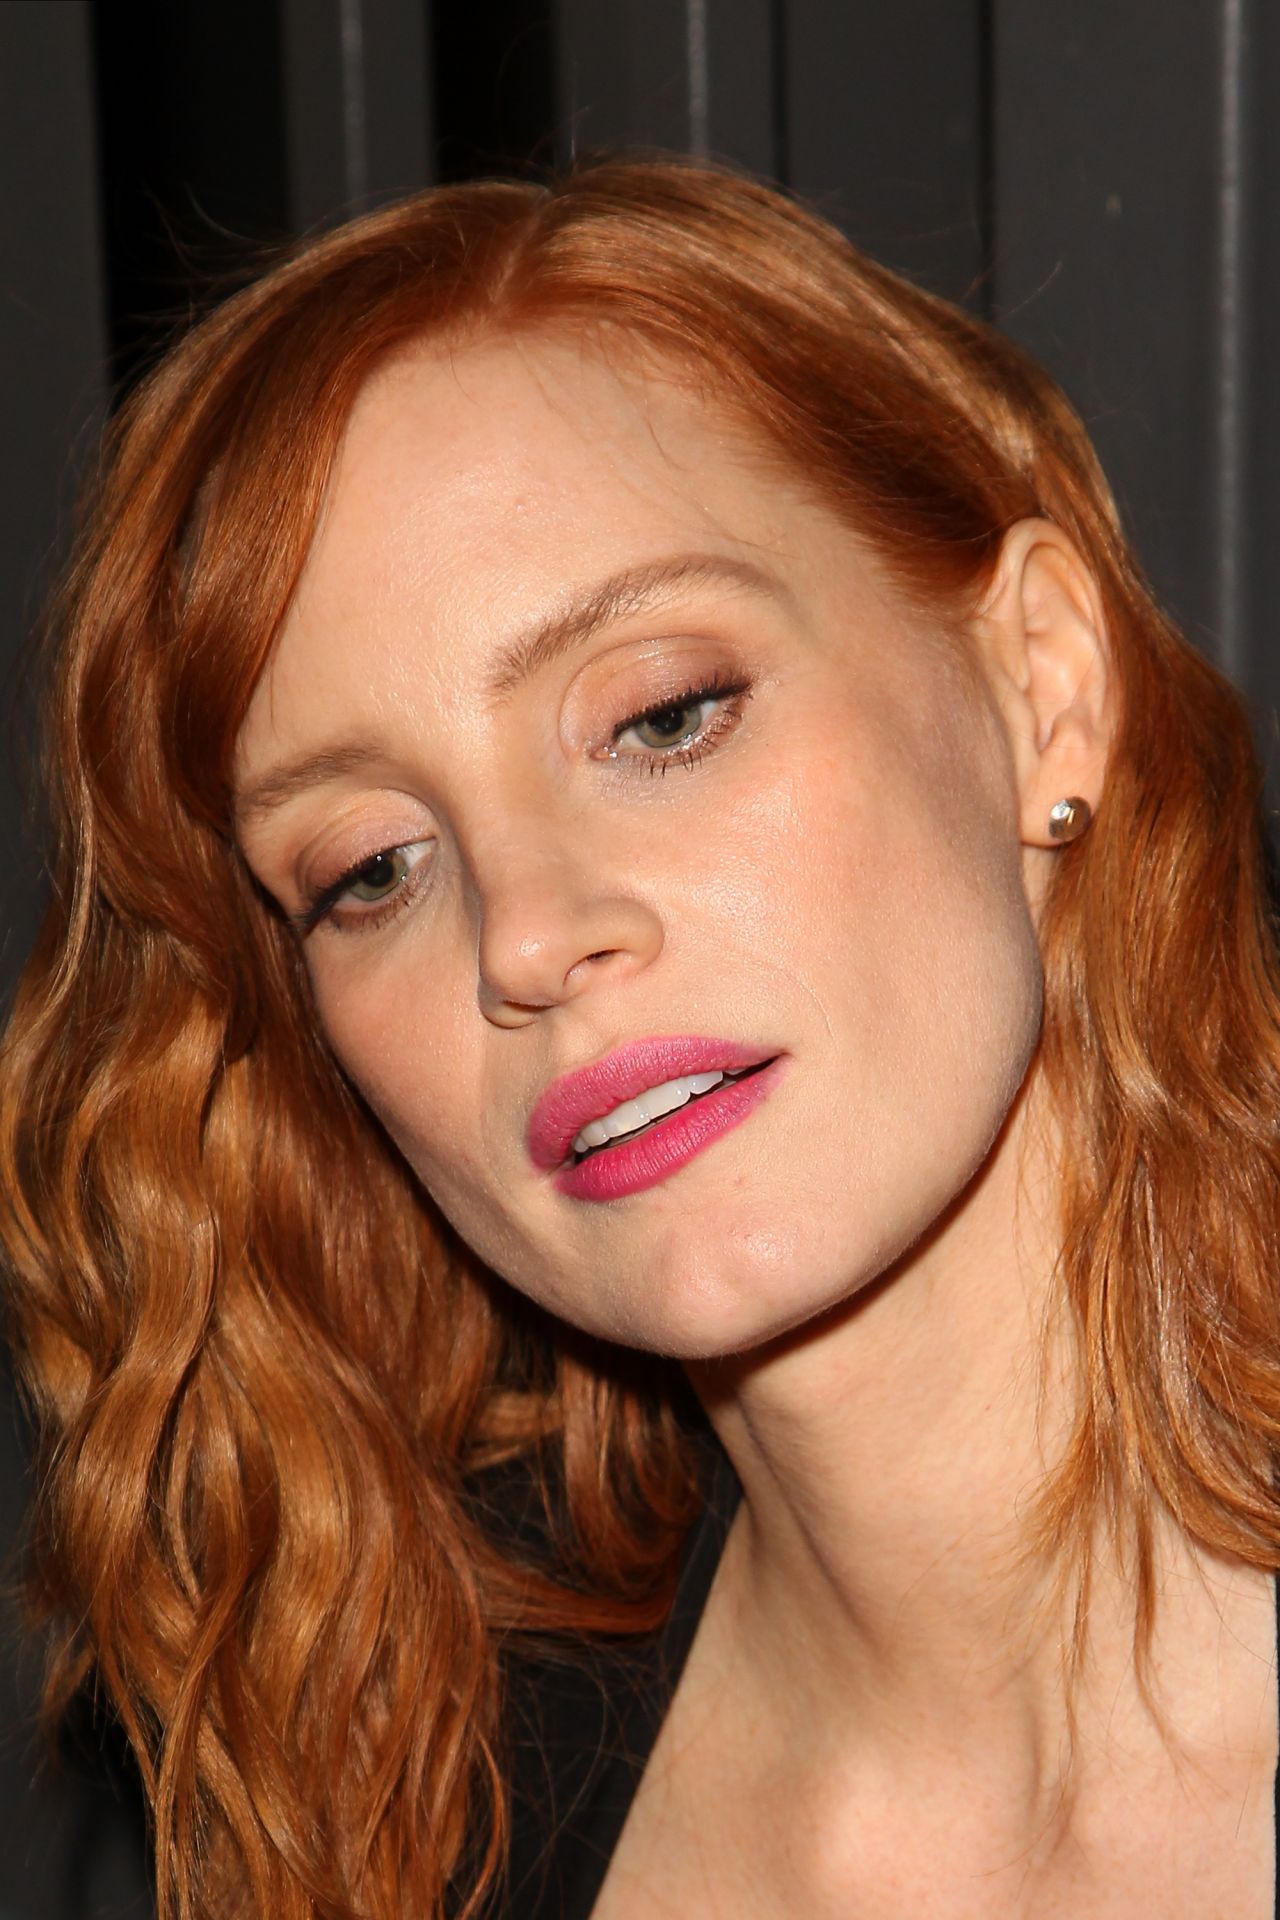 Jessica Chastain Night Out Style, West Hollywood - November 2014 ...